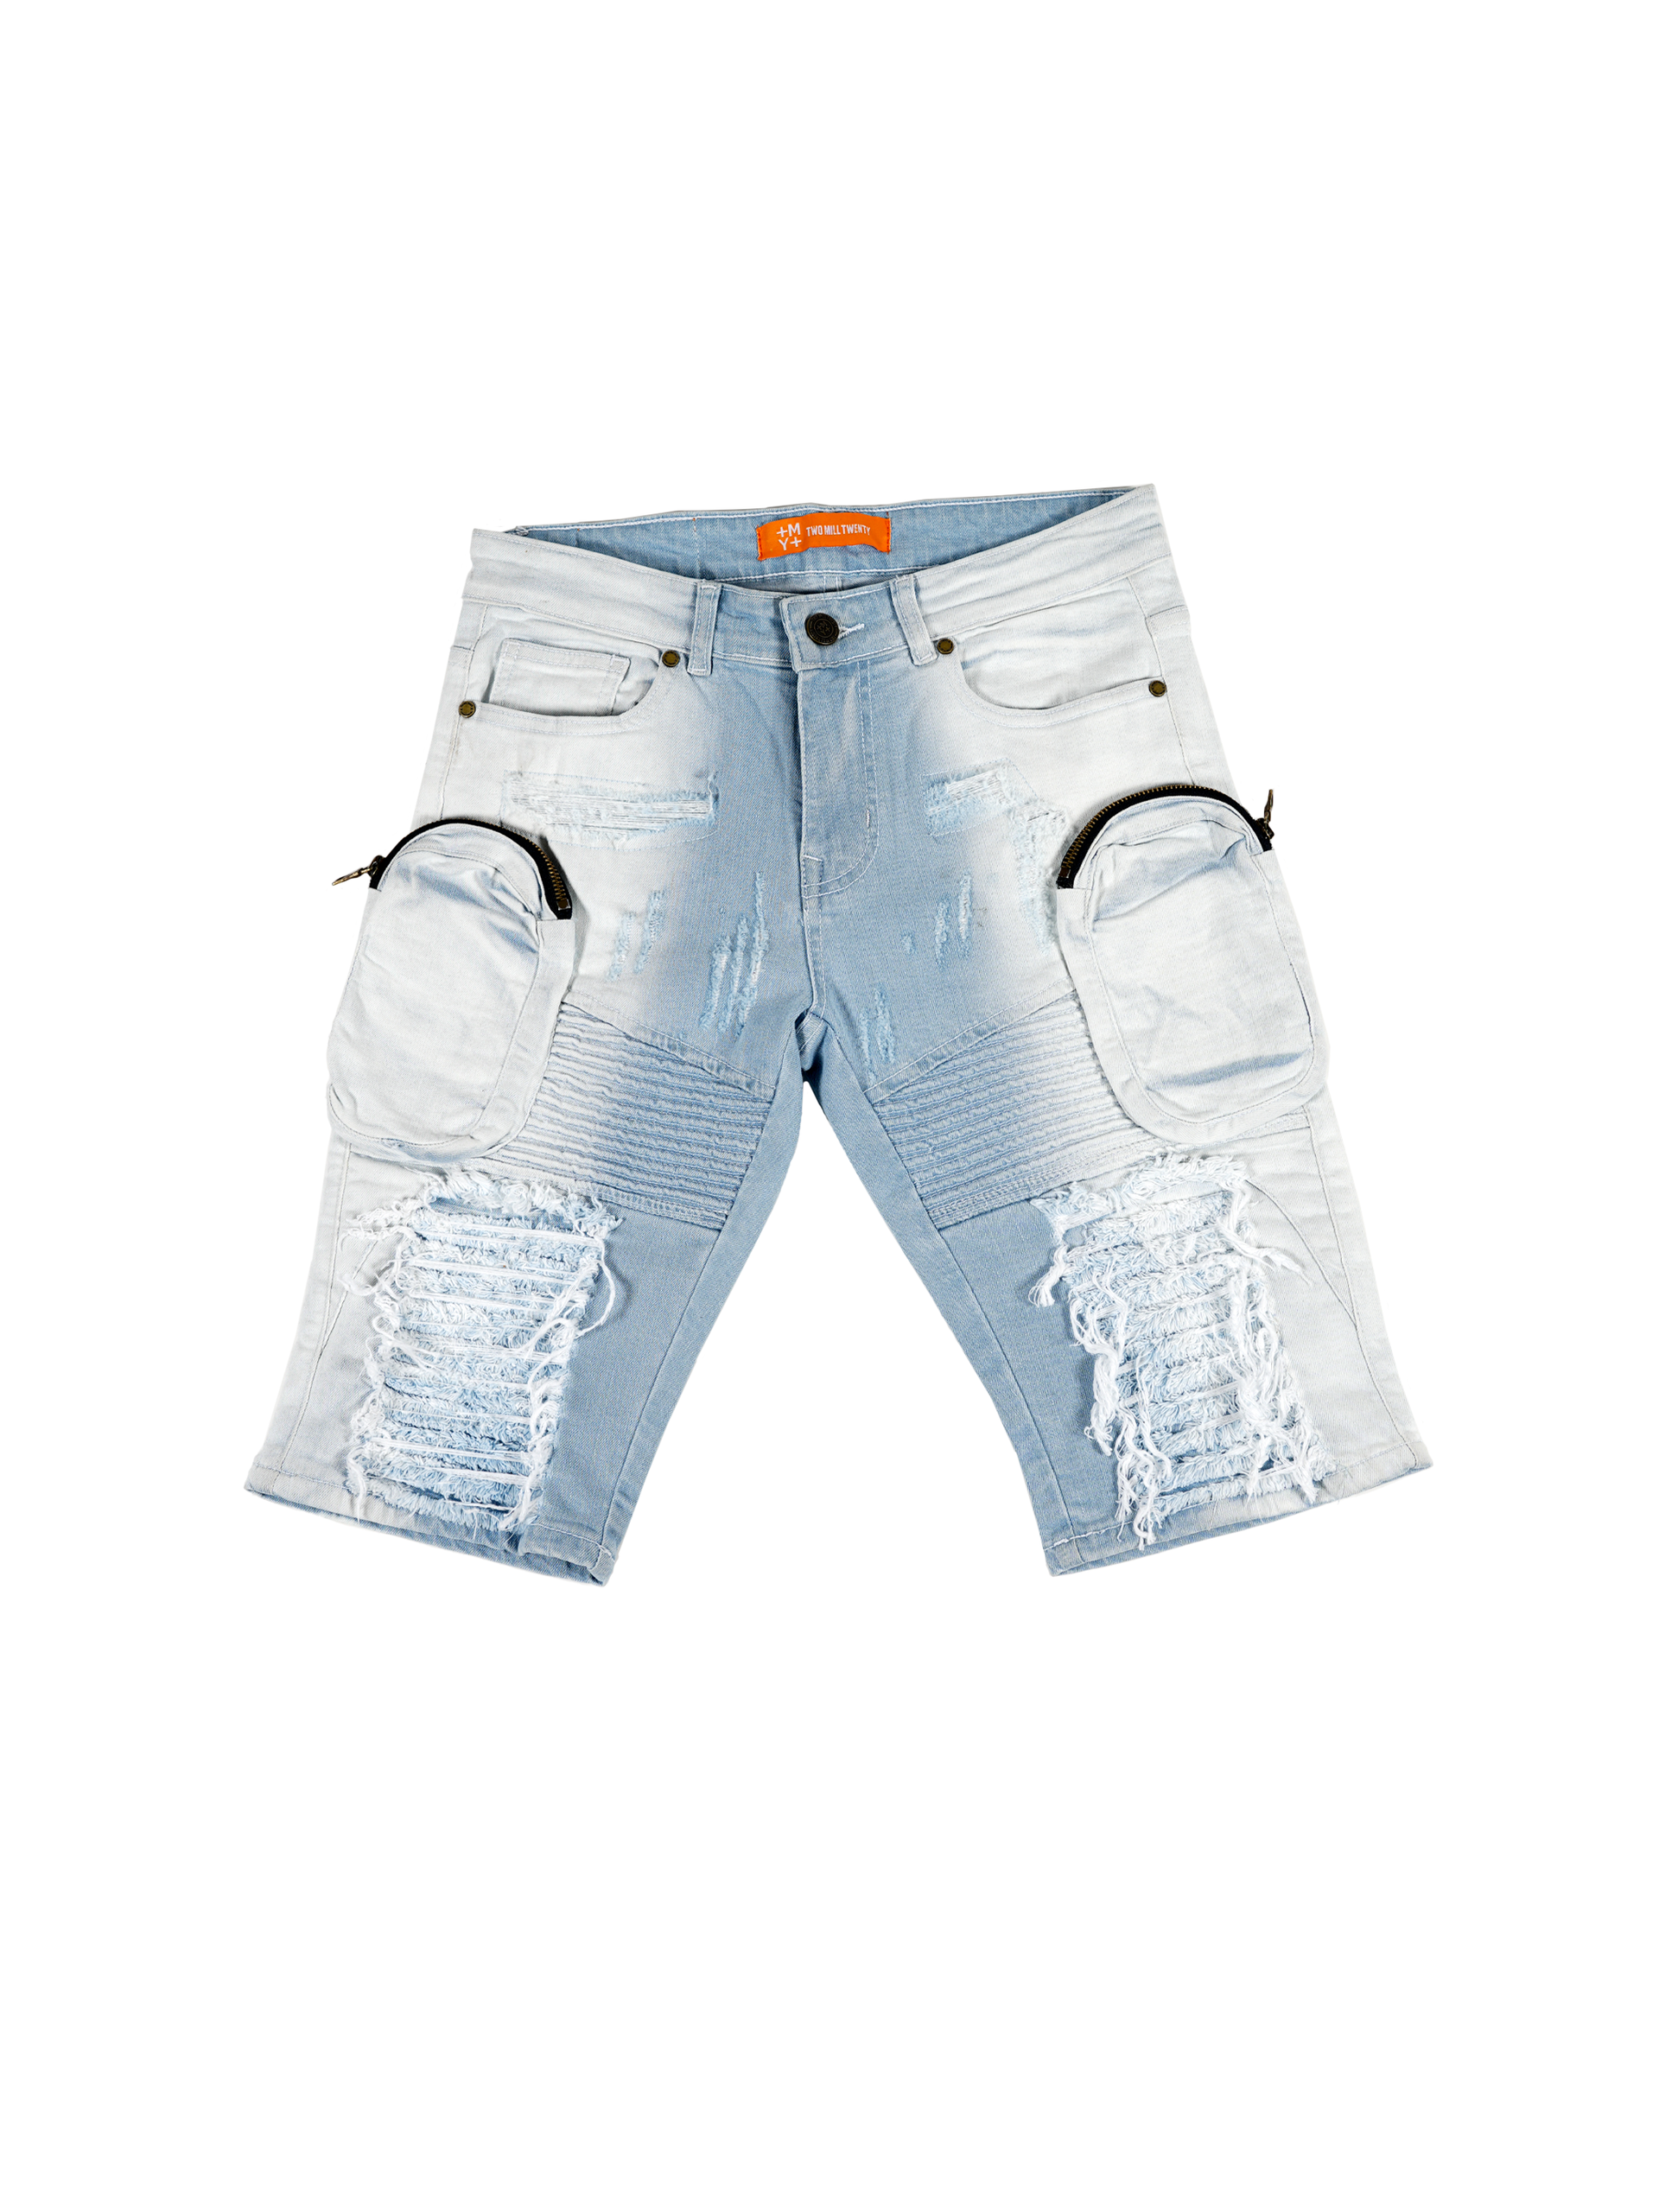 LAKE | Men's Slim Fit Frayed Cutoff Destroyed Ripped Distressed Knee Length Denim Jean Shorts with Cargo Pockets in Light Blue Wash